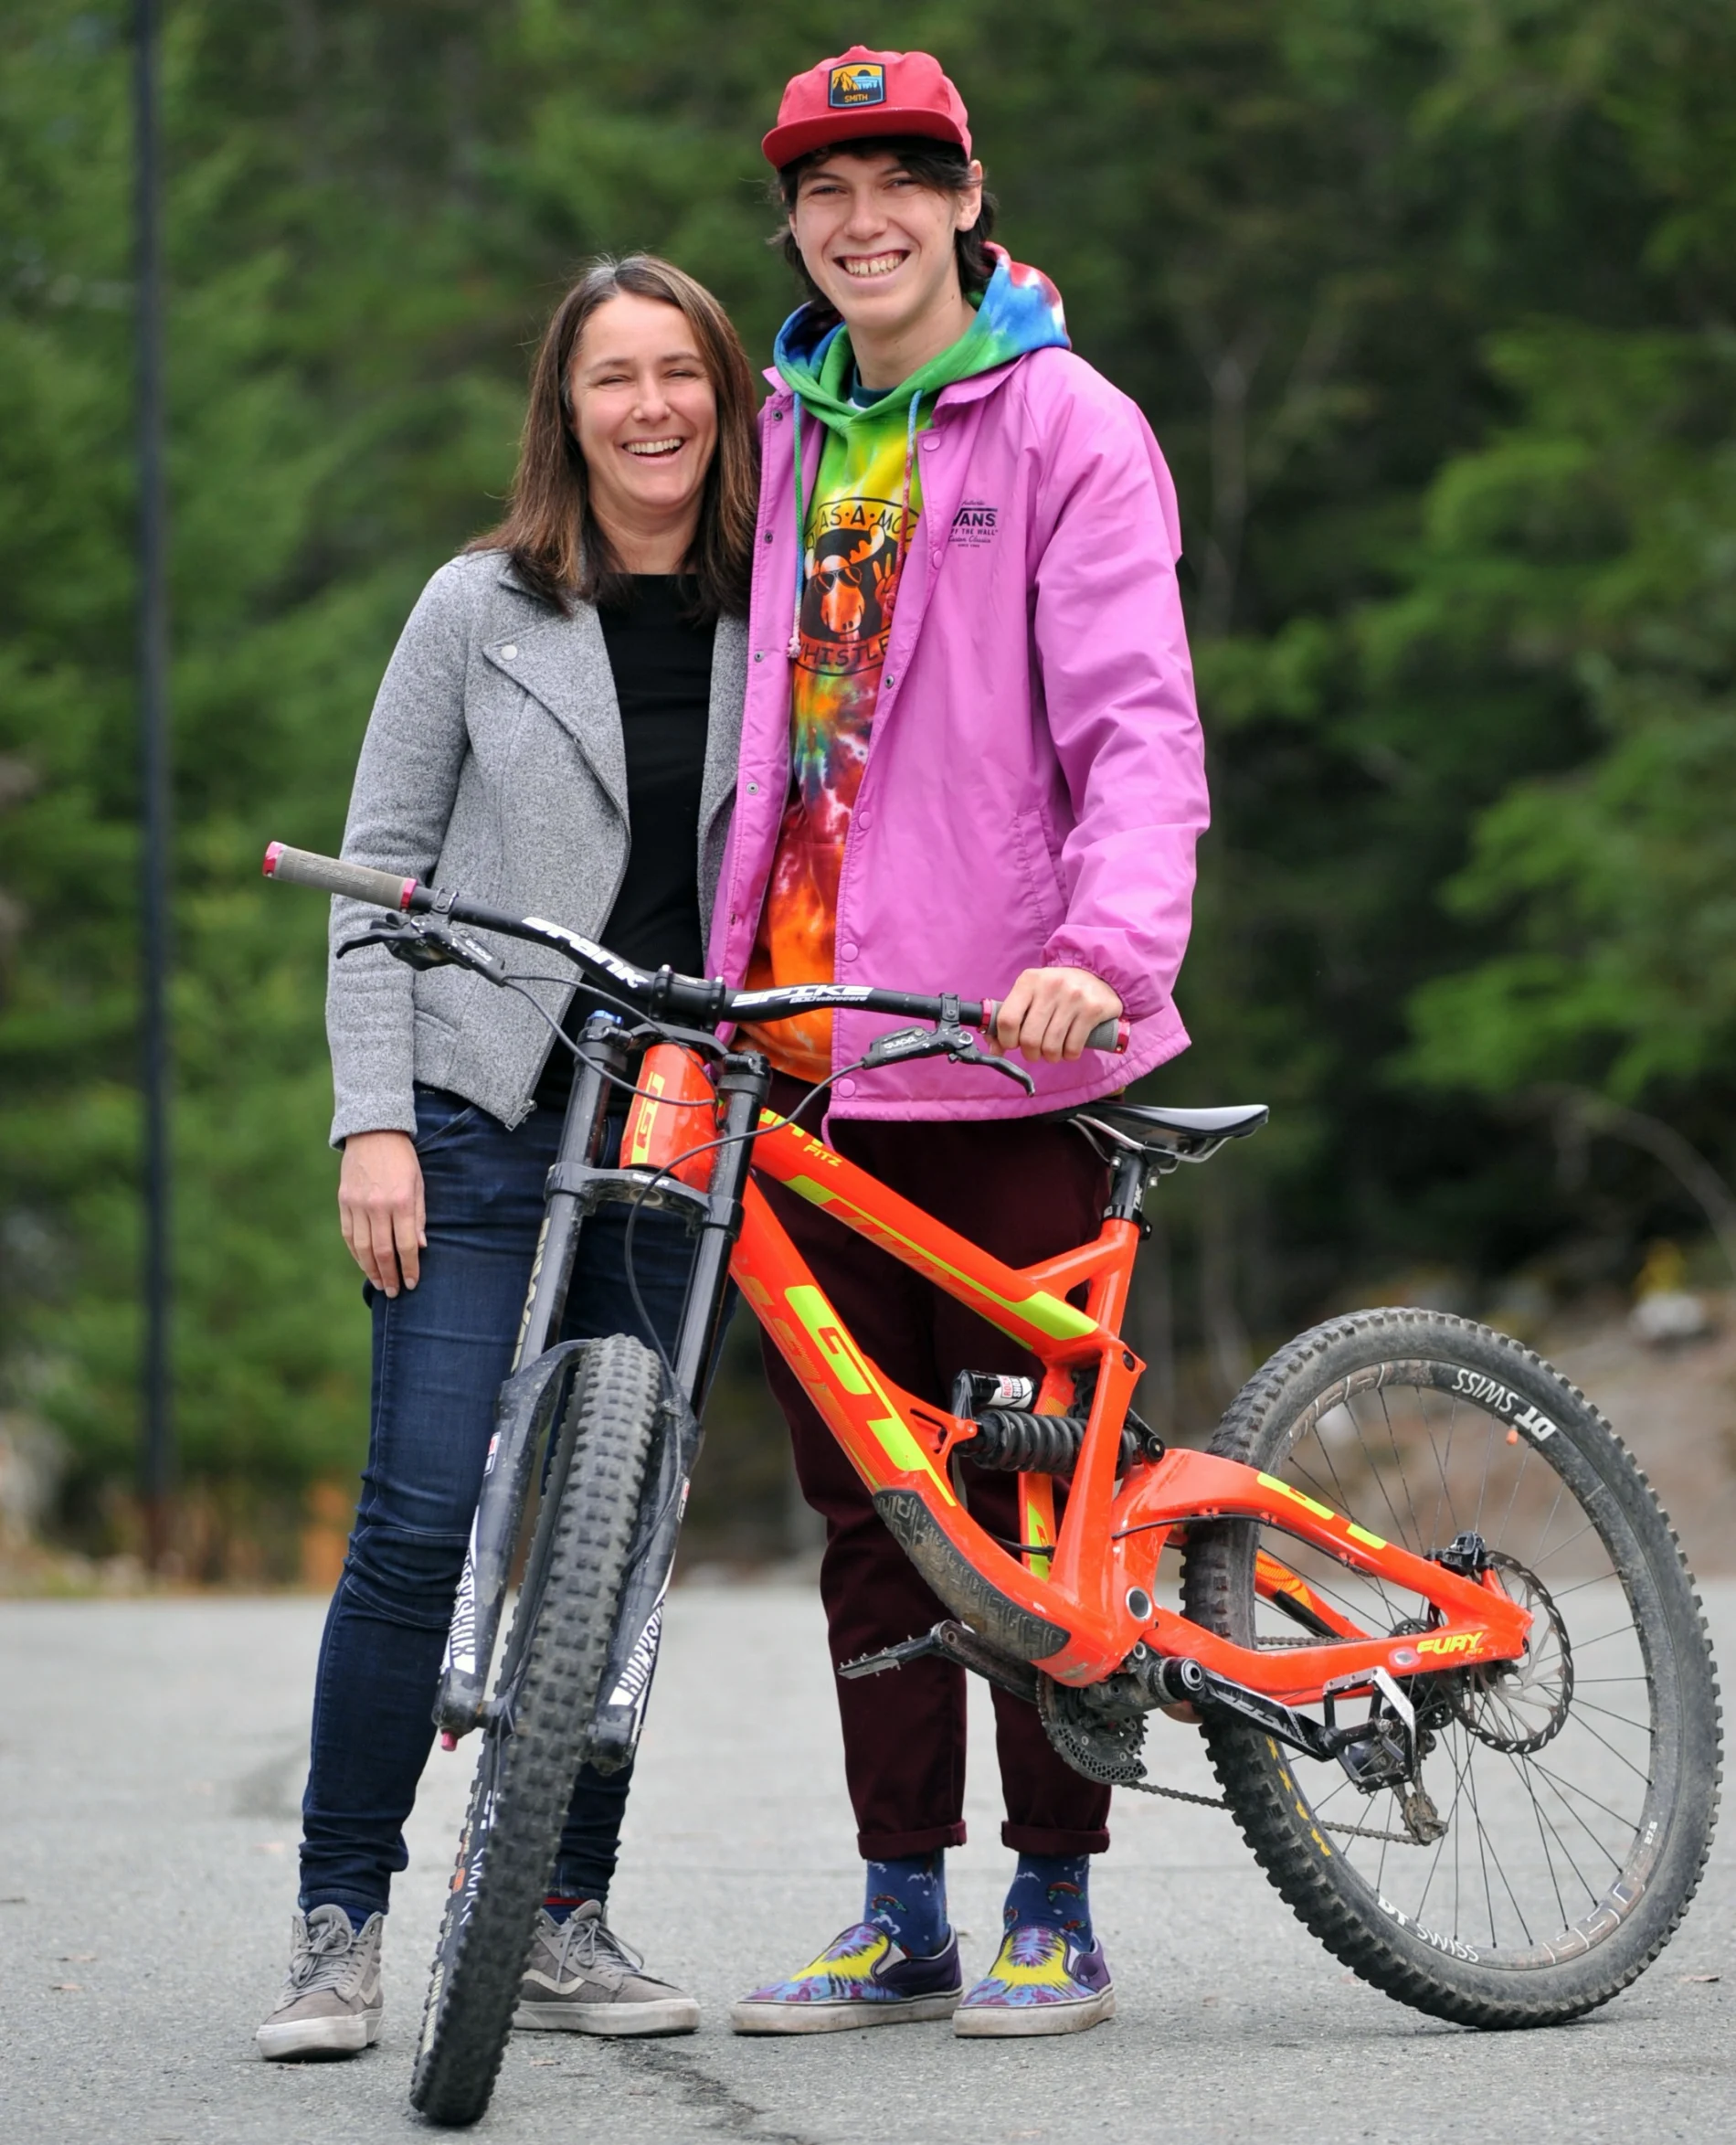 Dakota Williams with his mom, standing in front of a bicycle